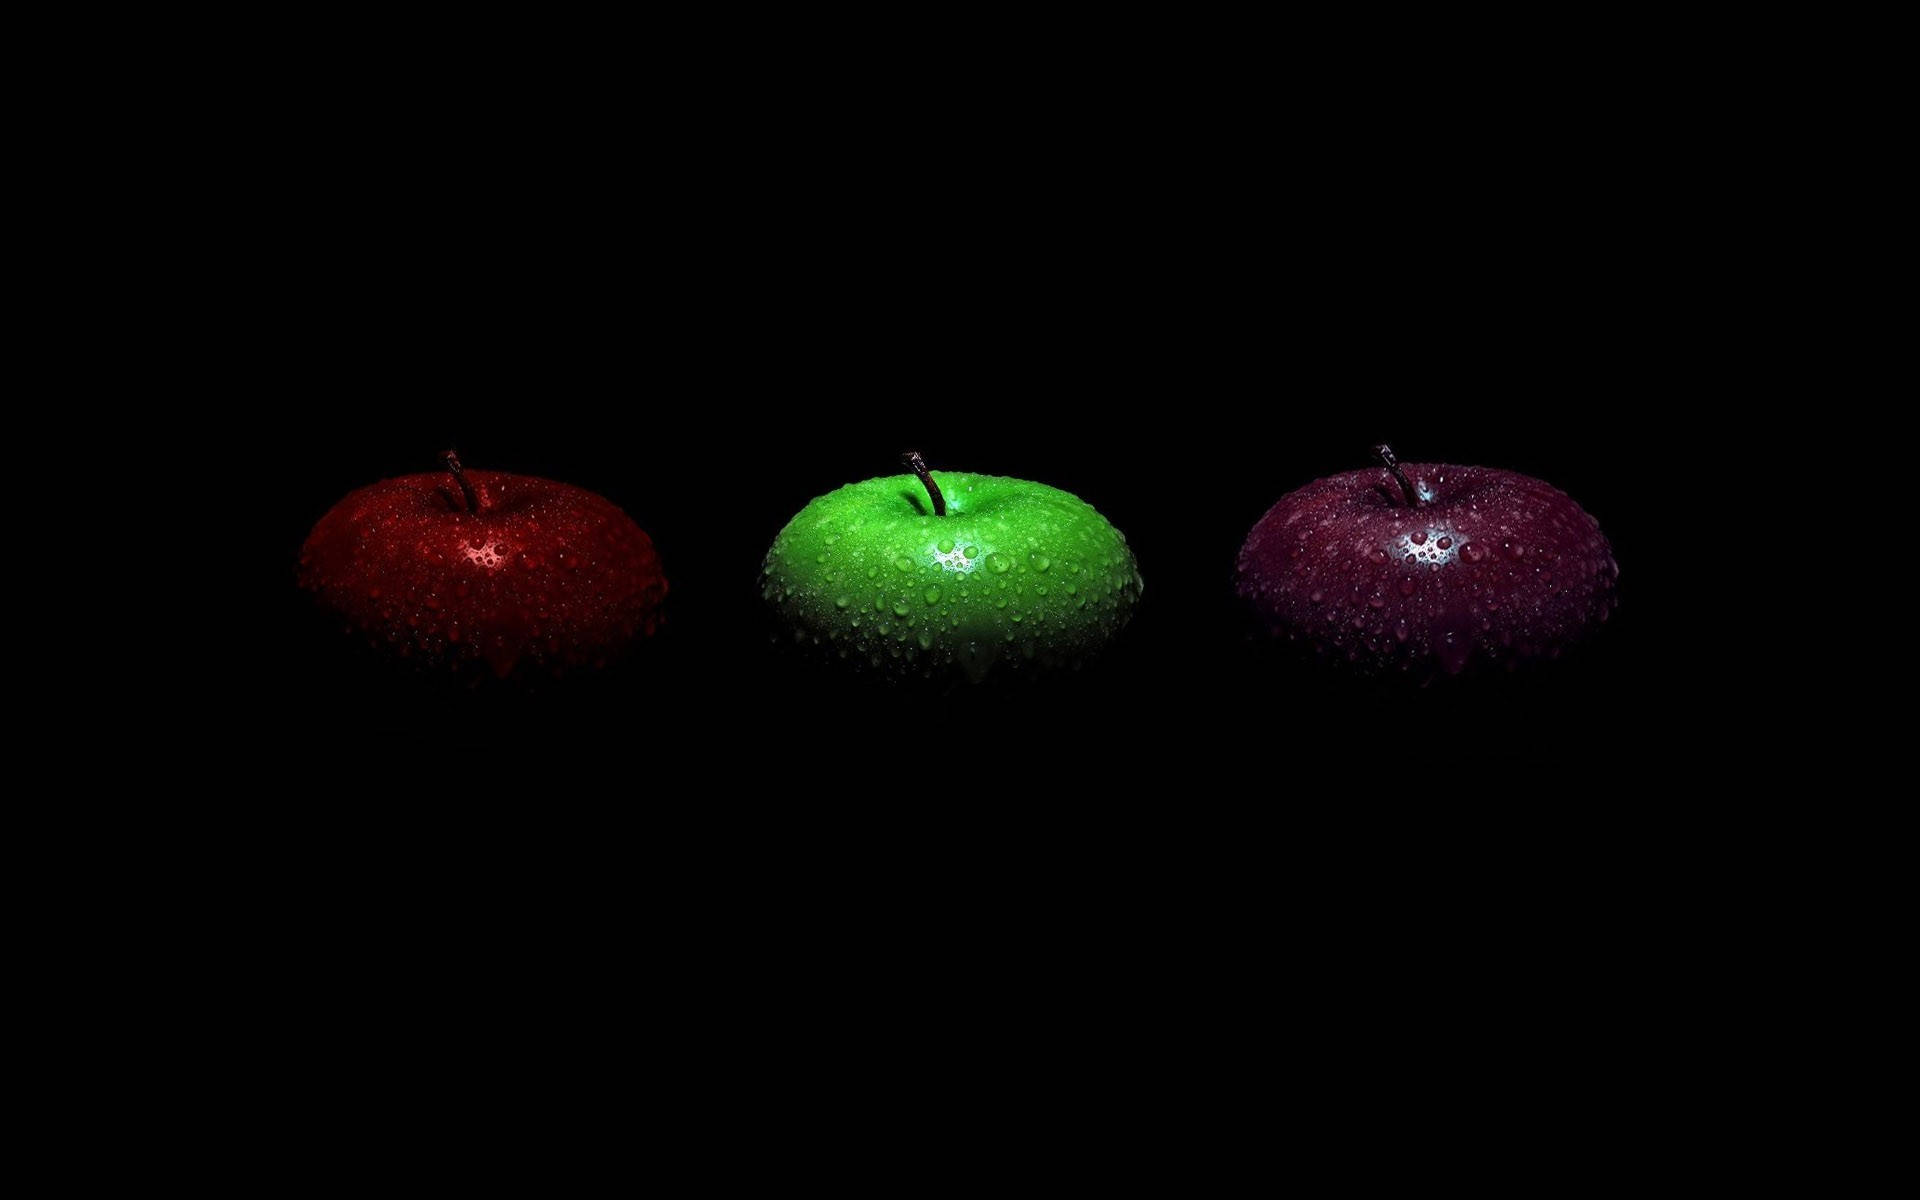 Black Color Background With Three Apples Wallpaper